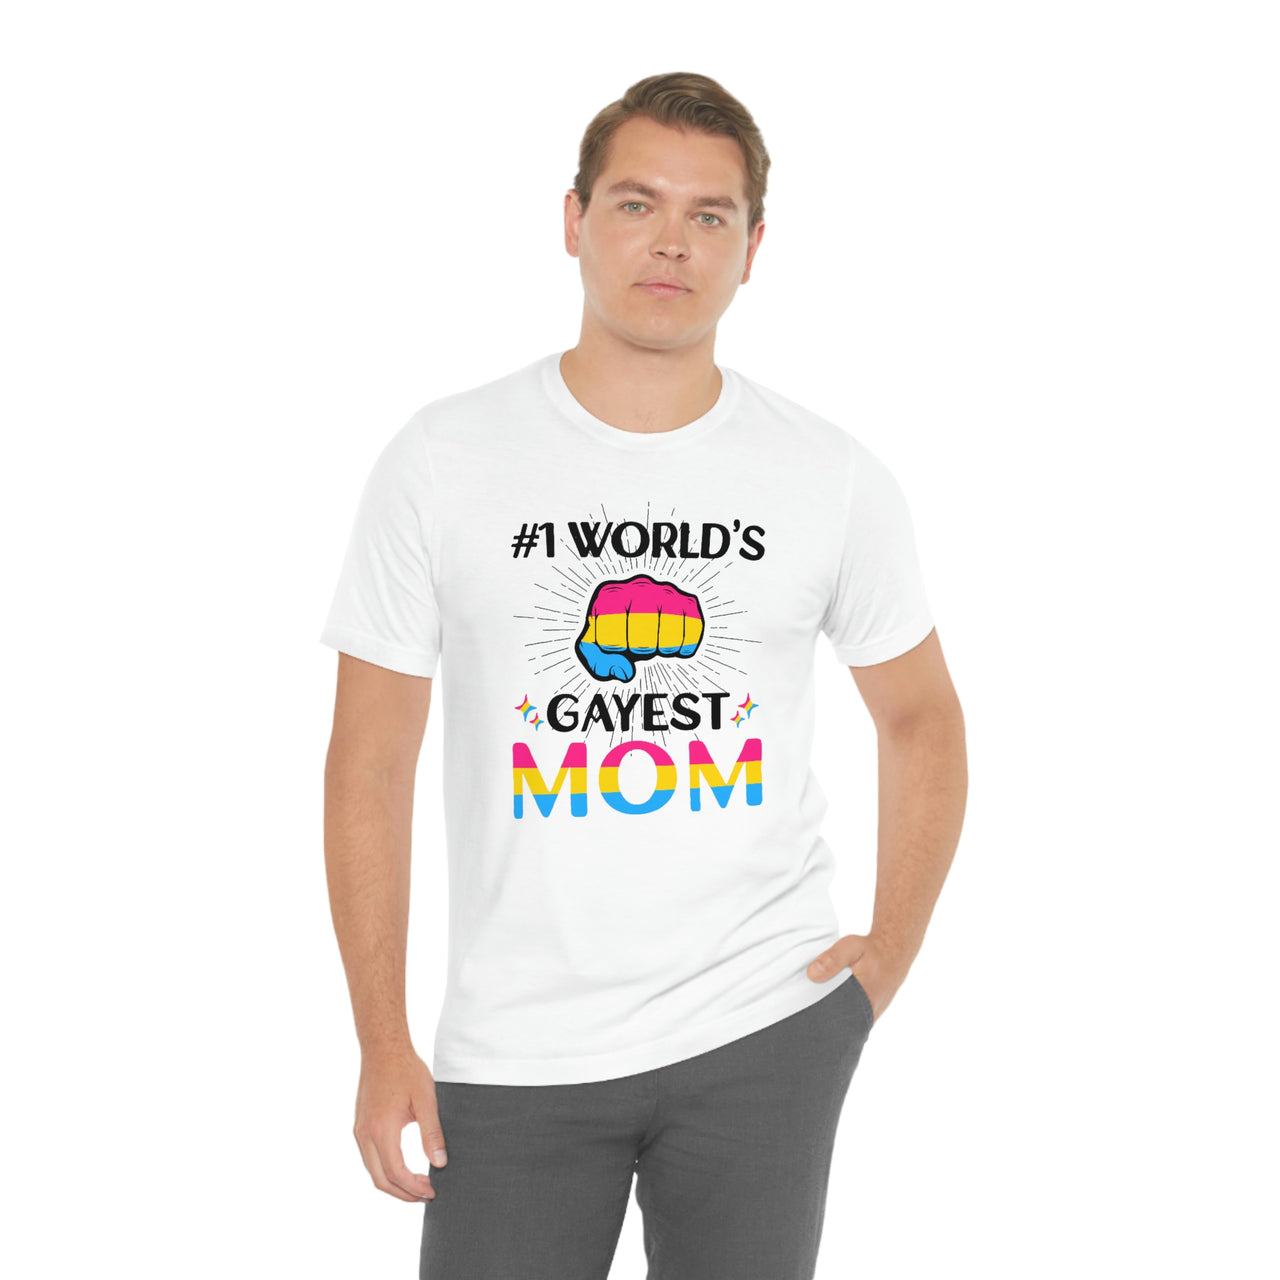 Pansexual Pride Flag Mother's Day Unisex Short Sleeve Tee - #1 World's Gayest Mom SHAVA CO